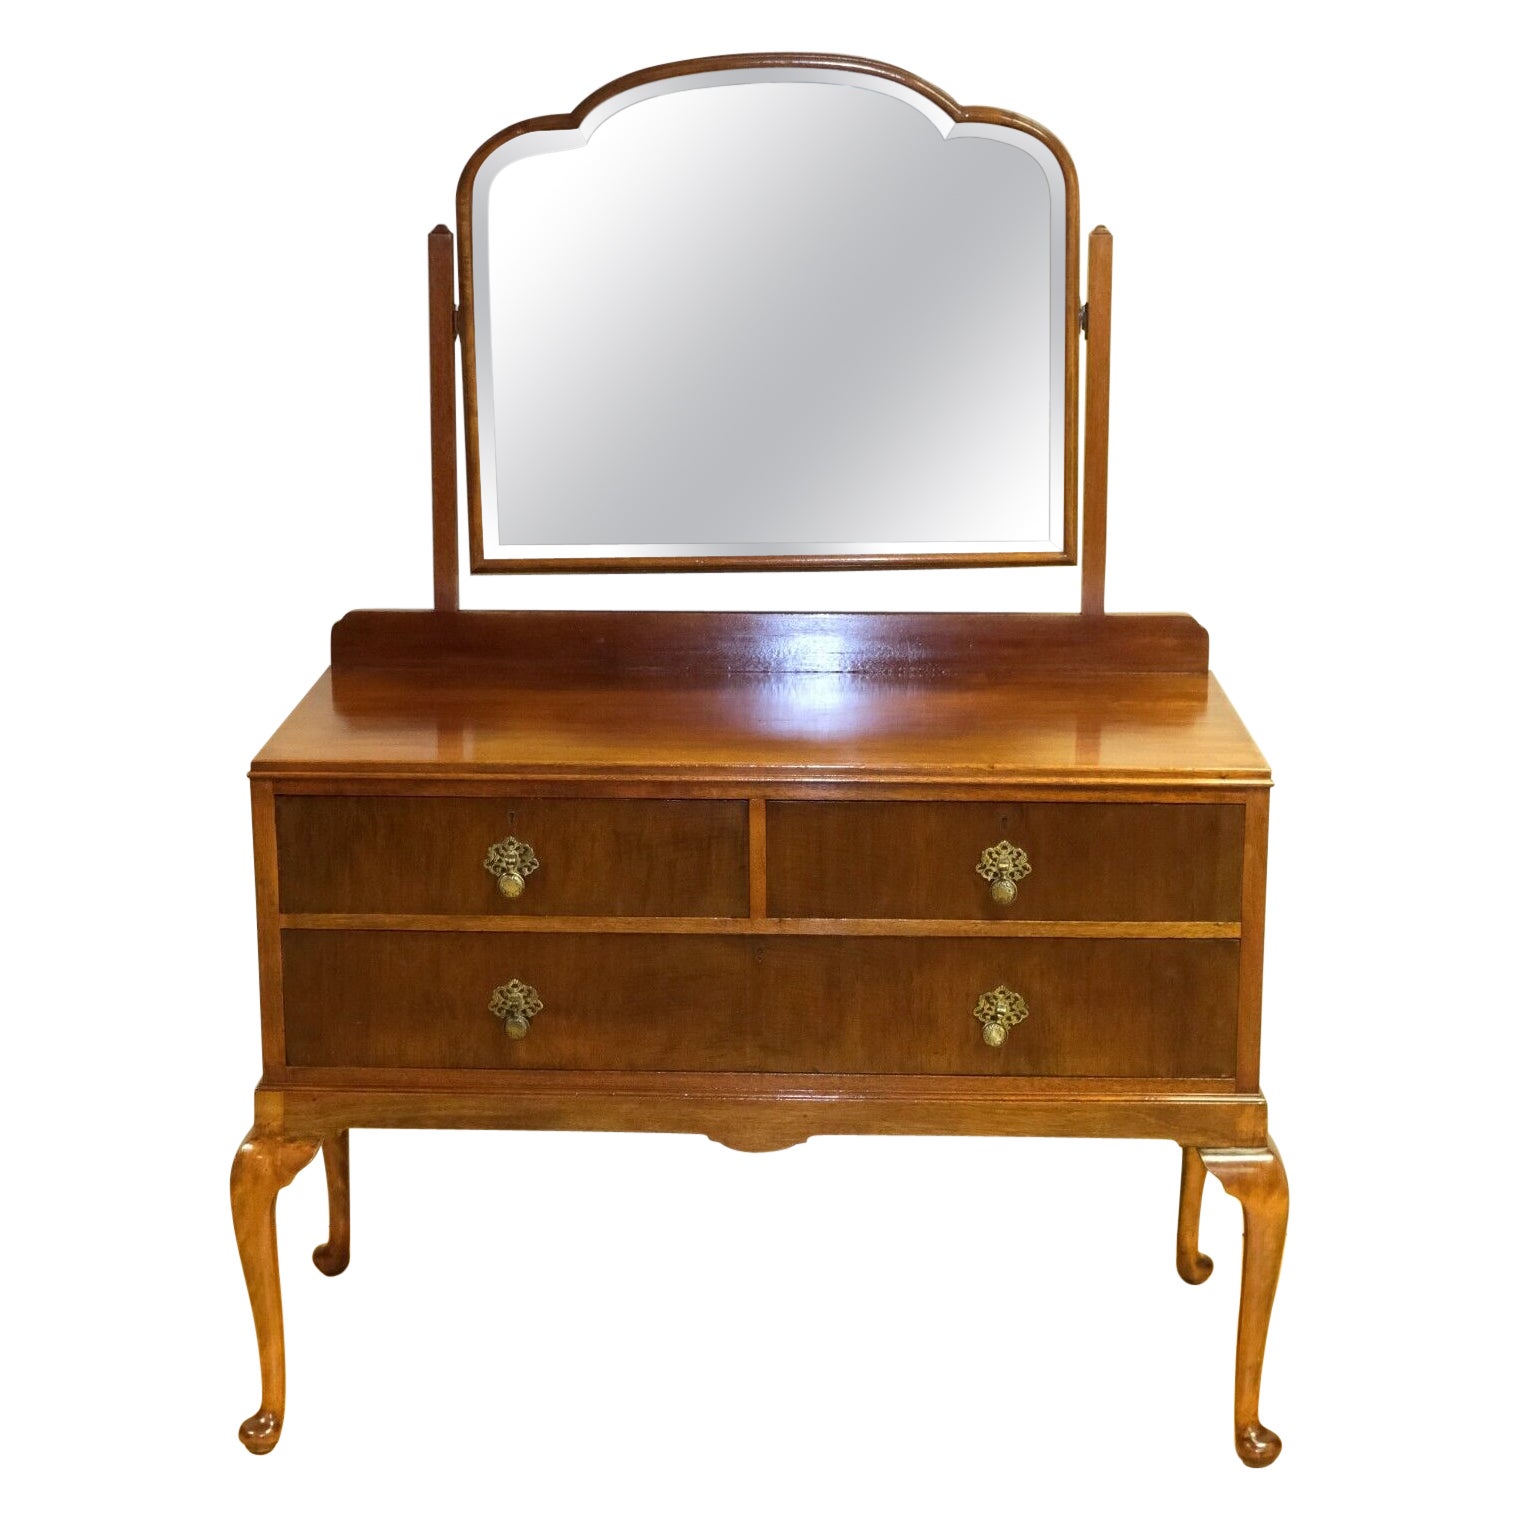 LOVELY EARLY 20TH CENTURY HARDWOOD DRESSiNG TABLE RAISED ON CABRIOLE LEGS For Sale